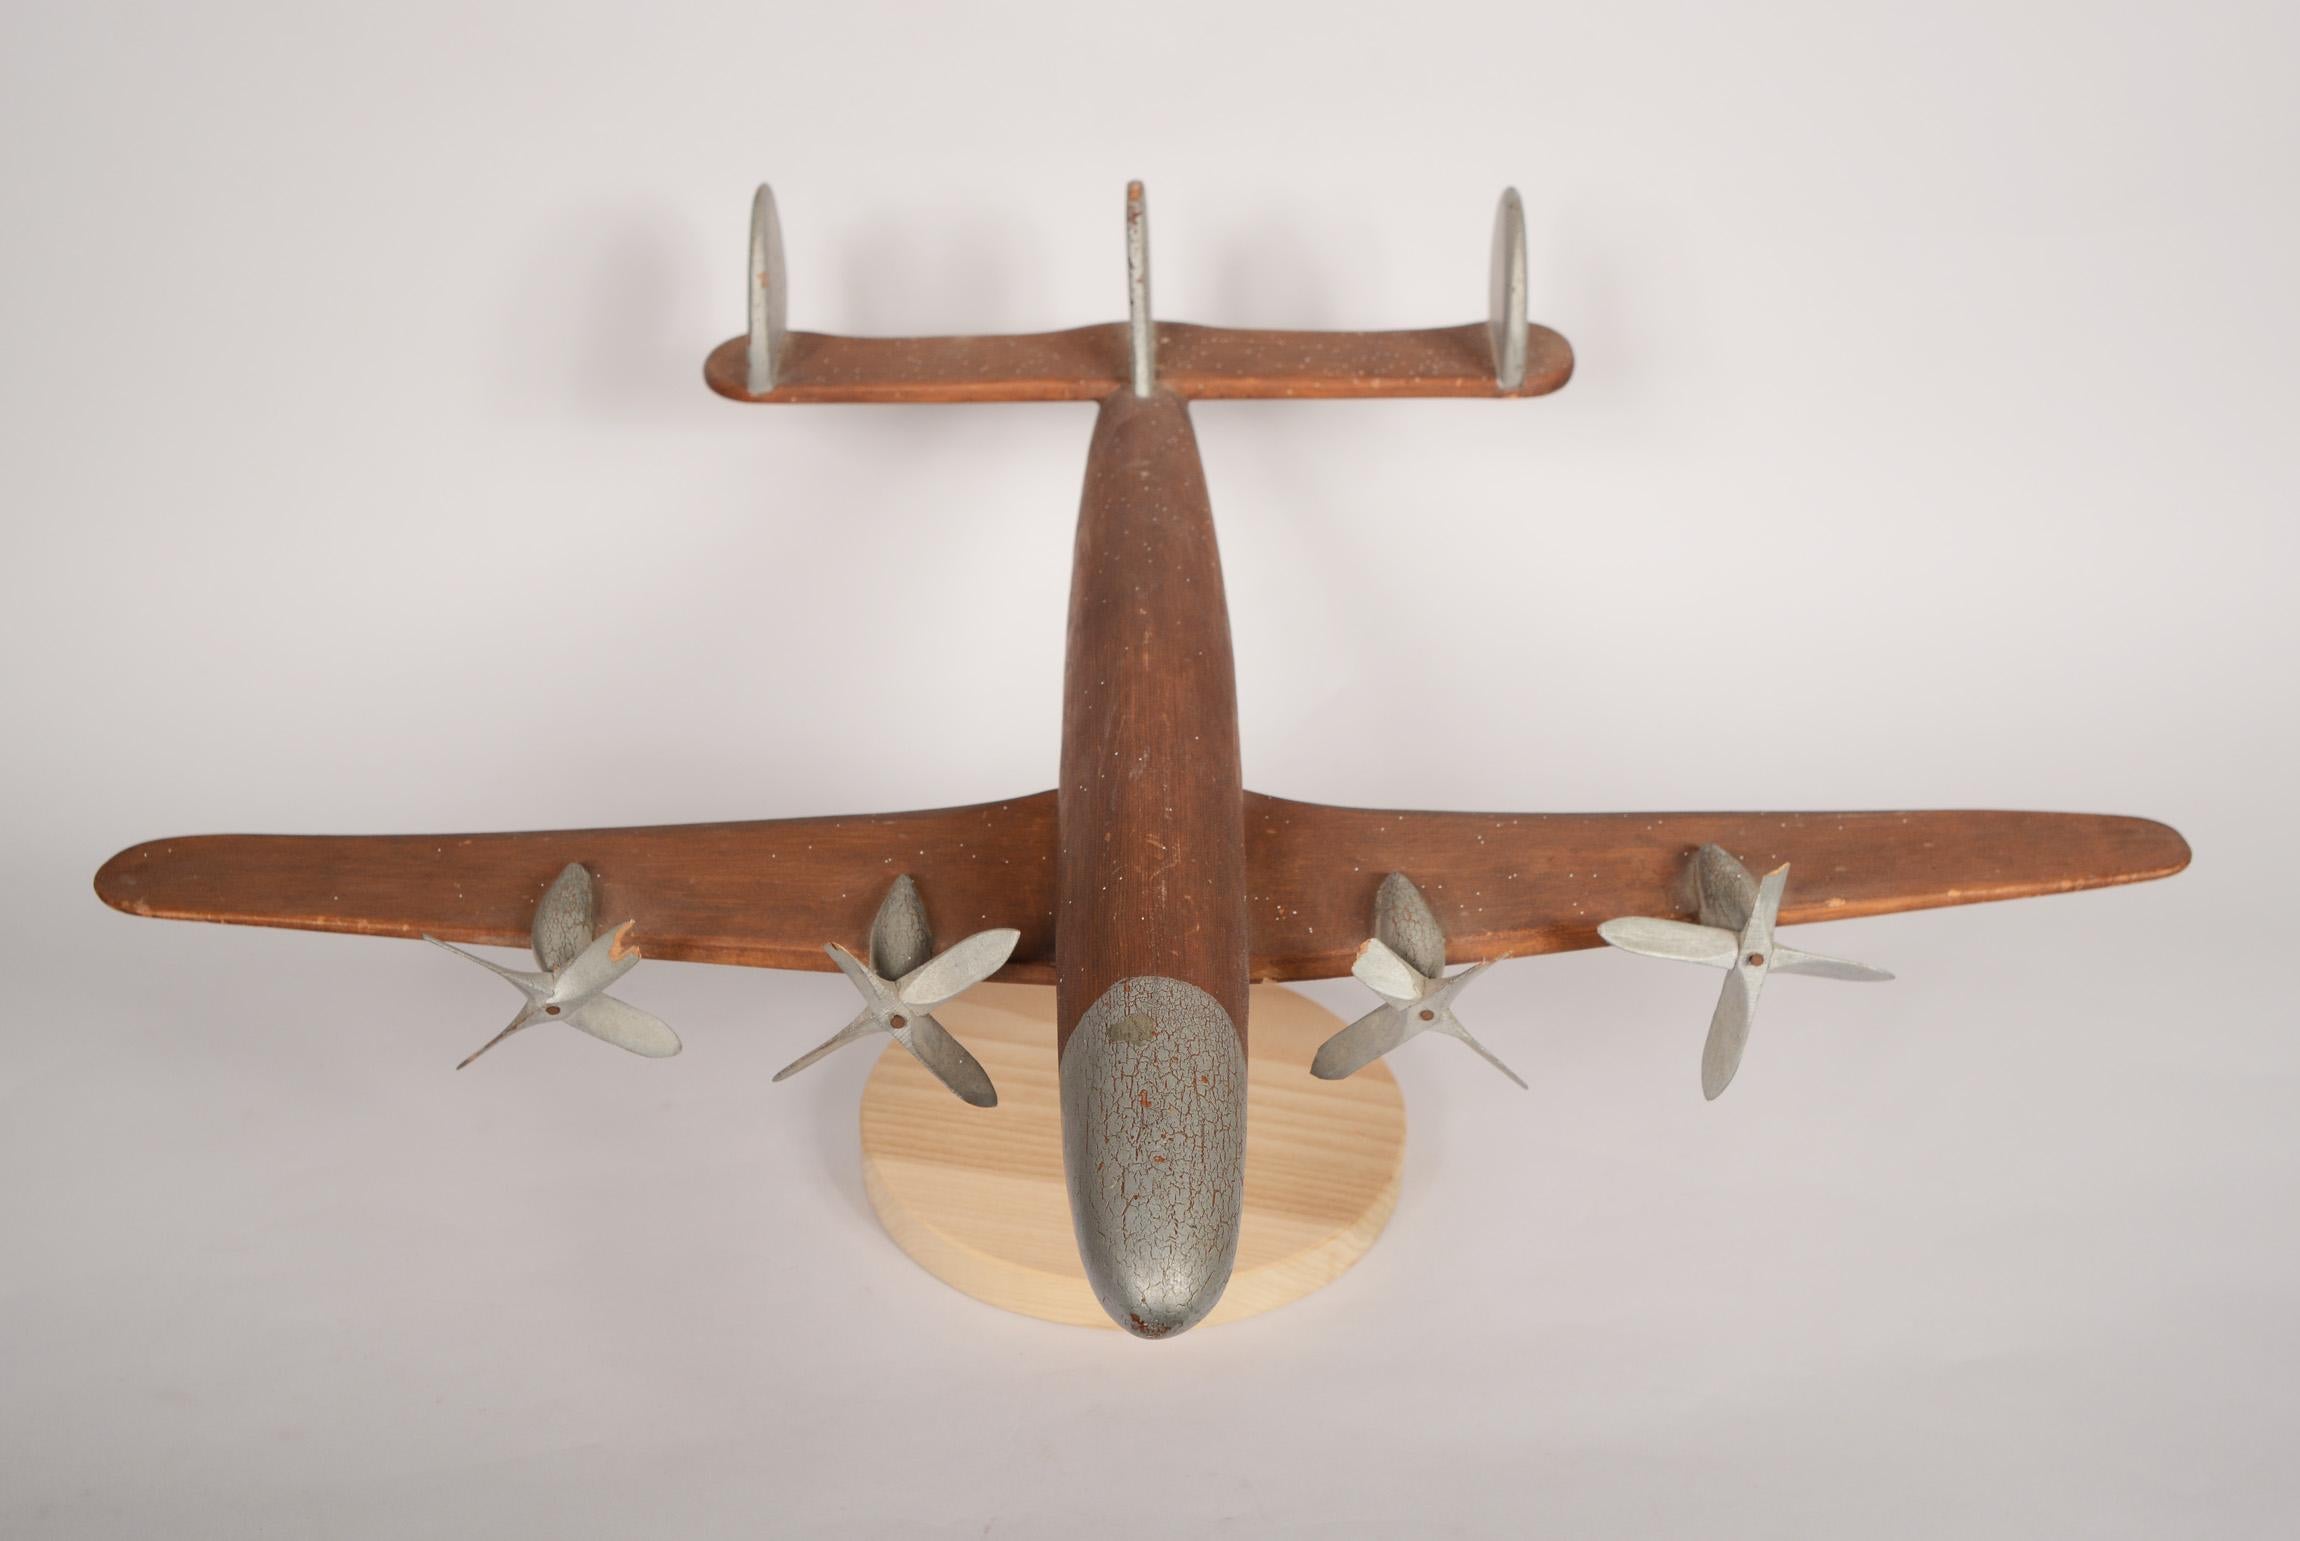 American Folk Art Model of a Lockheed Constellation Airliner For Sale